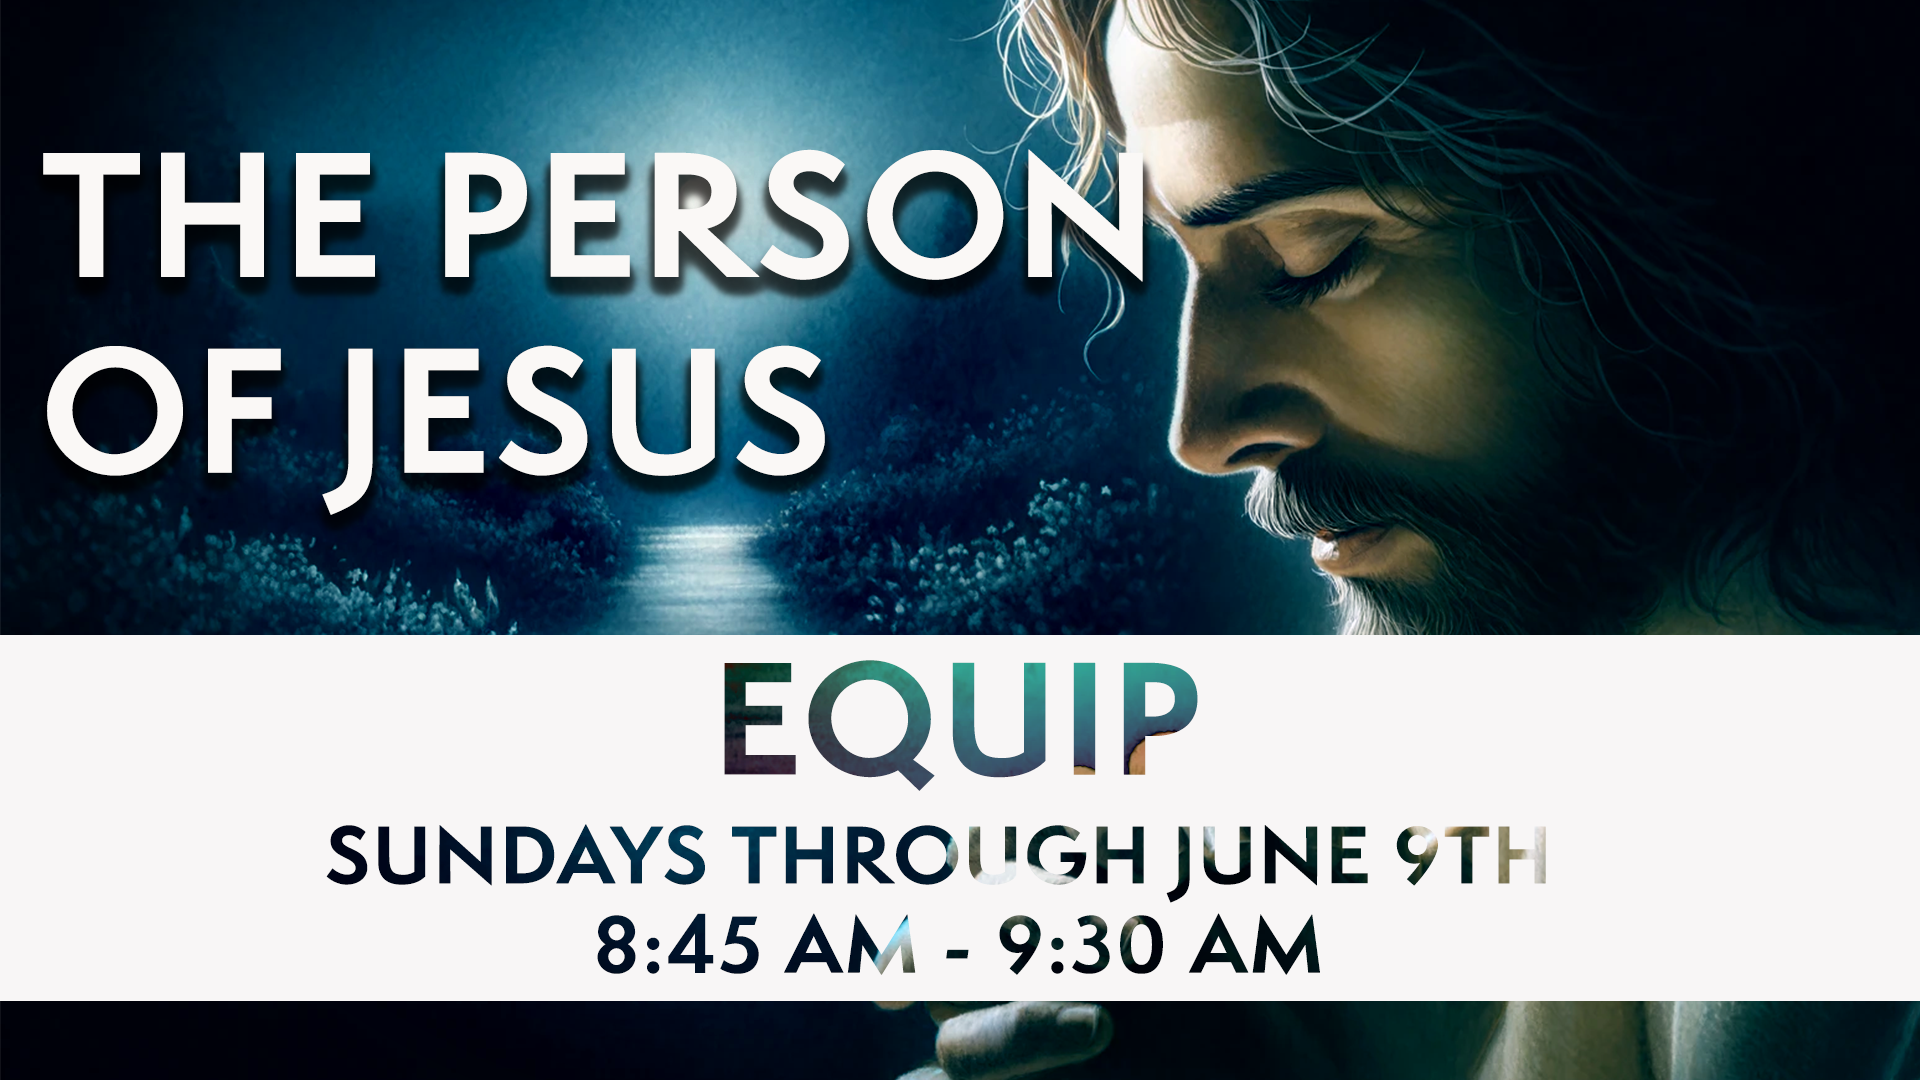 EQUIP: The Person of Jesus